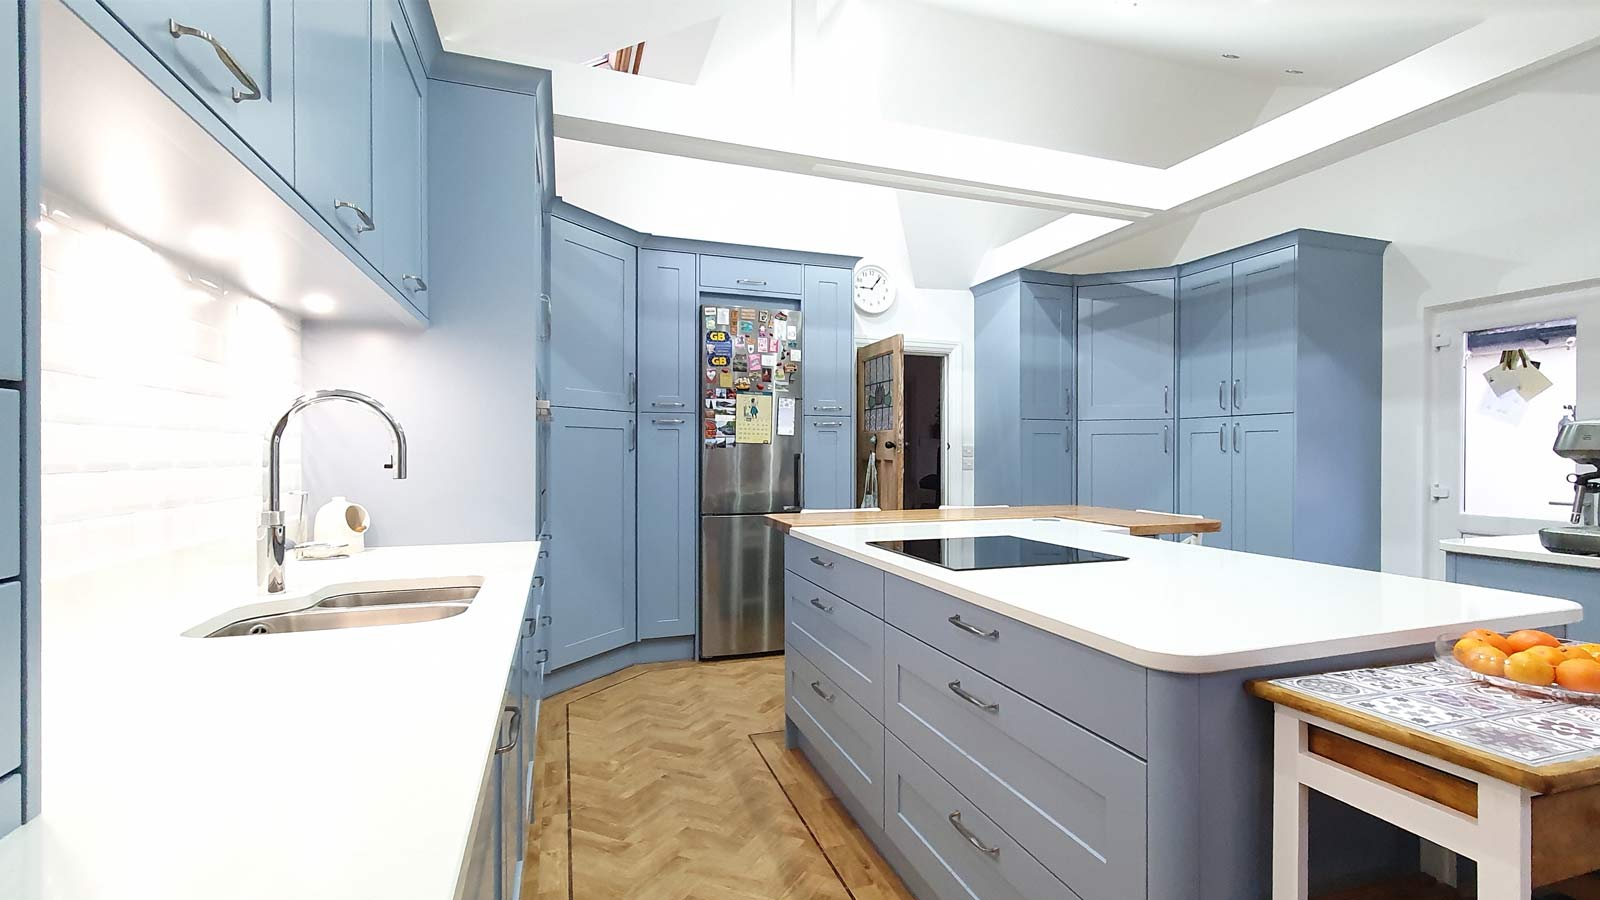 A light blue, luxury Shaker kitchen ideal for small kitchen inspiration